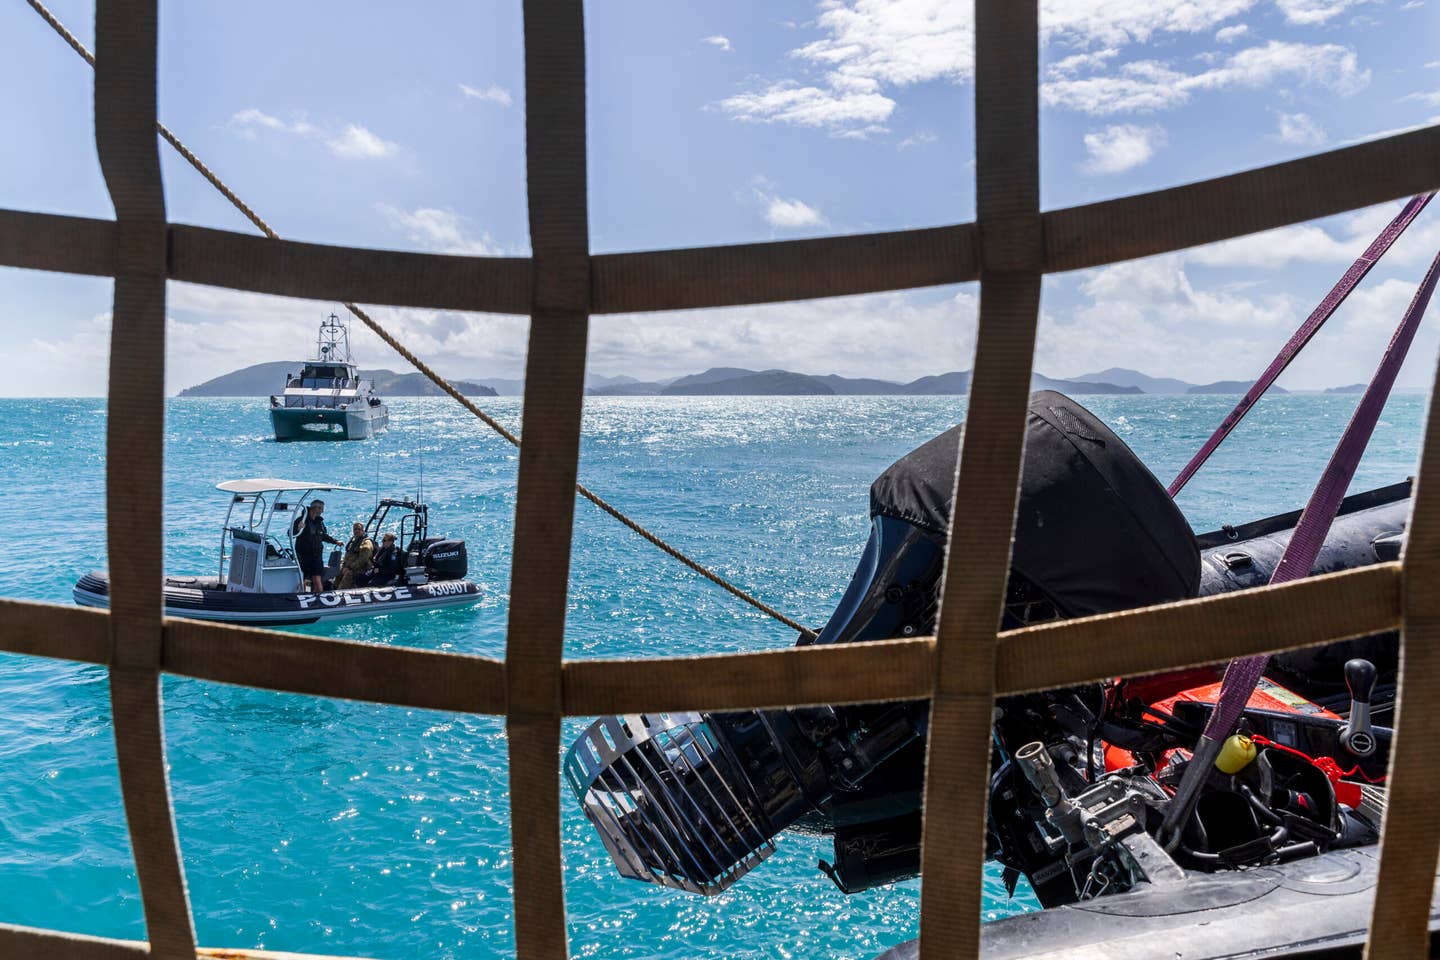 Royal Australian Navy clearance divers and Queensland Water Police return to the auxiliary ship ADV <em>Reliant</em> after conducting diving operations during the MRH90 Taipan recovery operation. <em>COMMONWEALTH OF AUSTRALIA, DEPARTMENT OF DEFENSE</em>